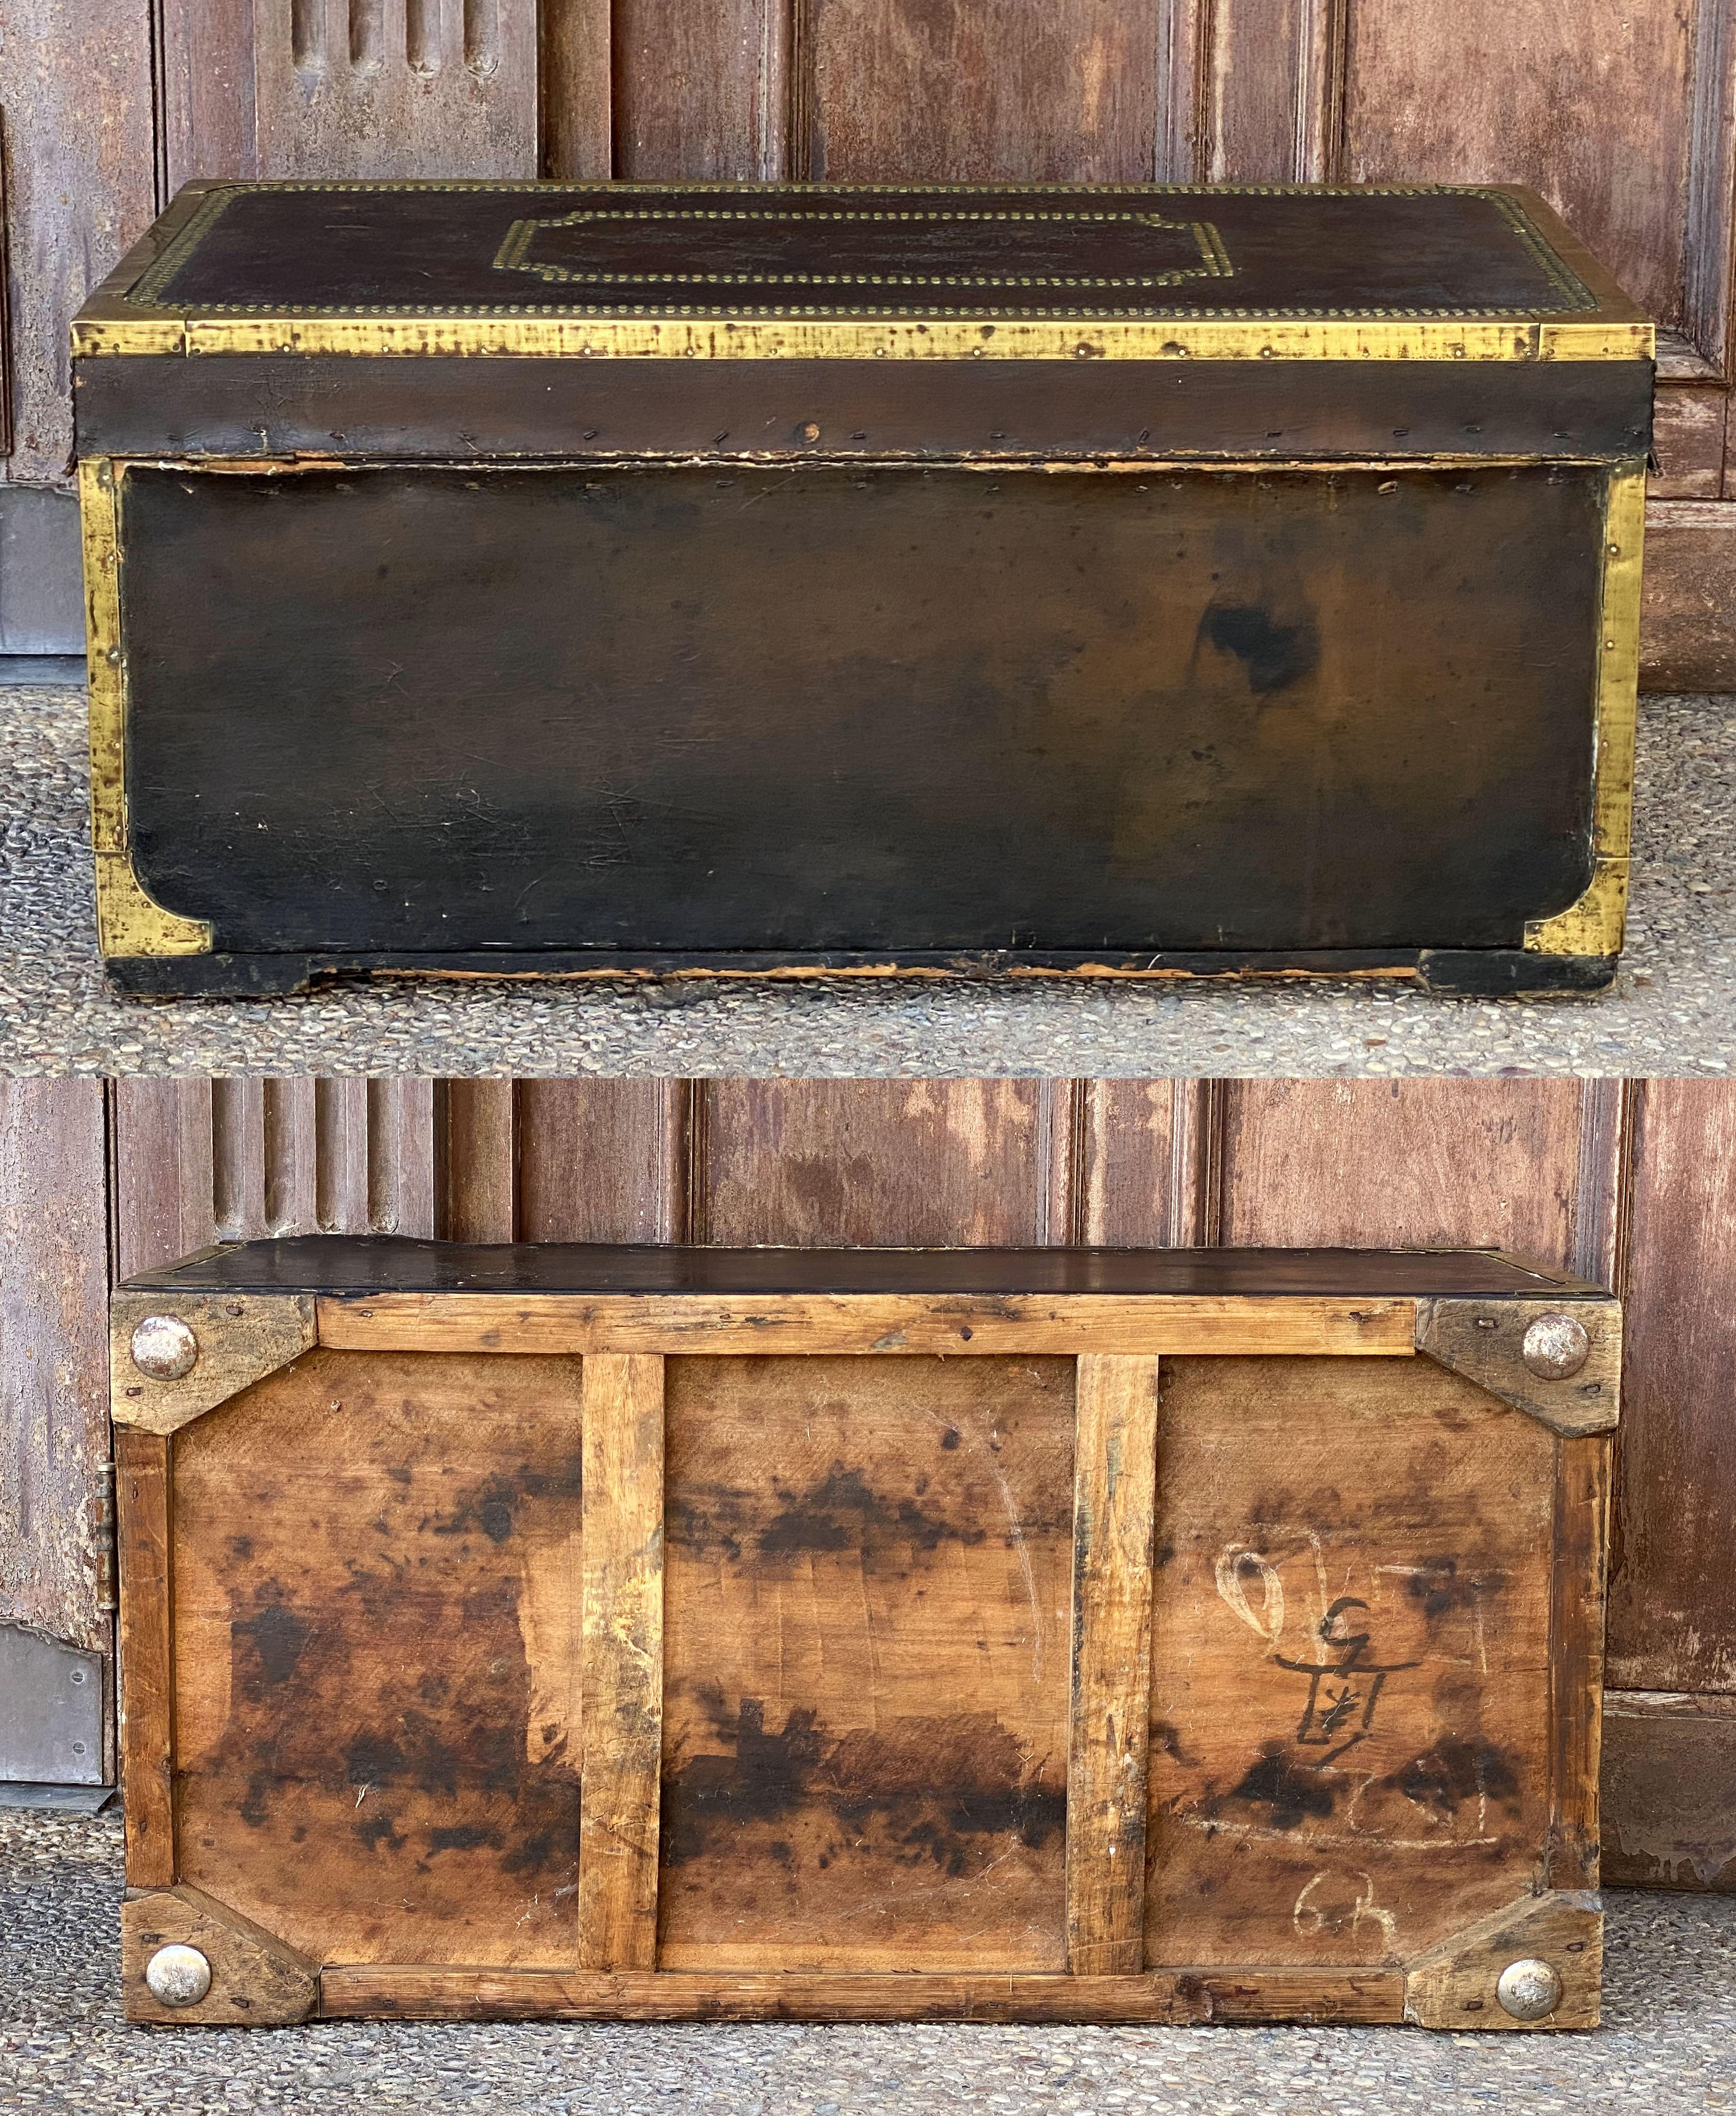 English Campaign Trunk of Brass-Bound Leather and Camphor Wood, Circa 1820 15